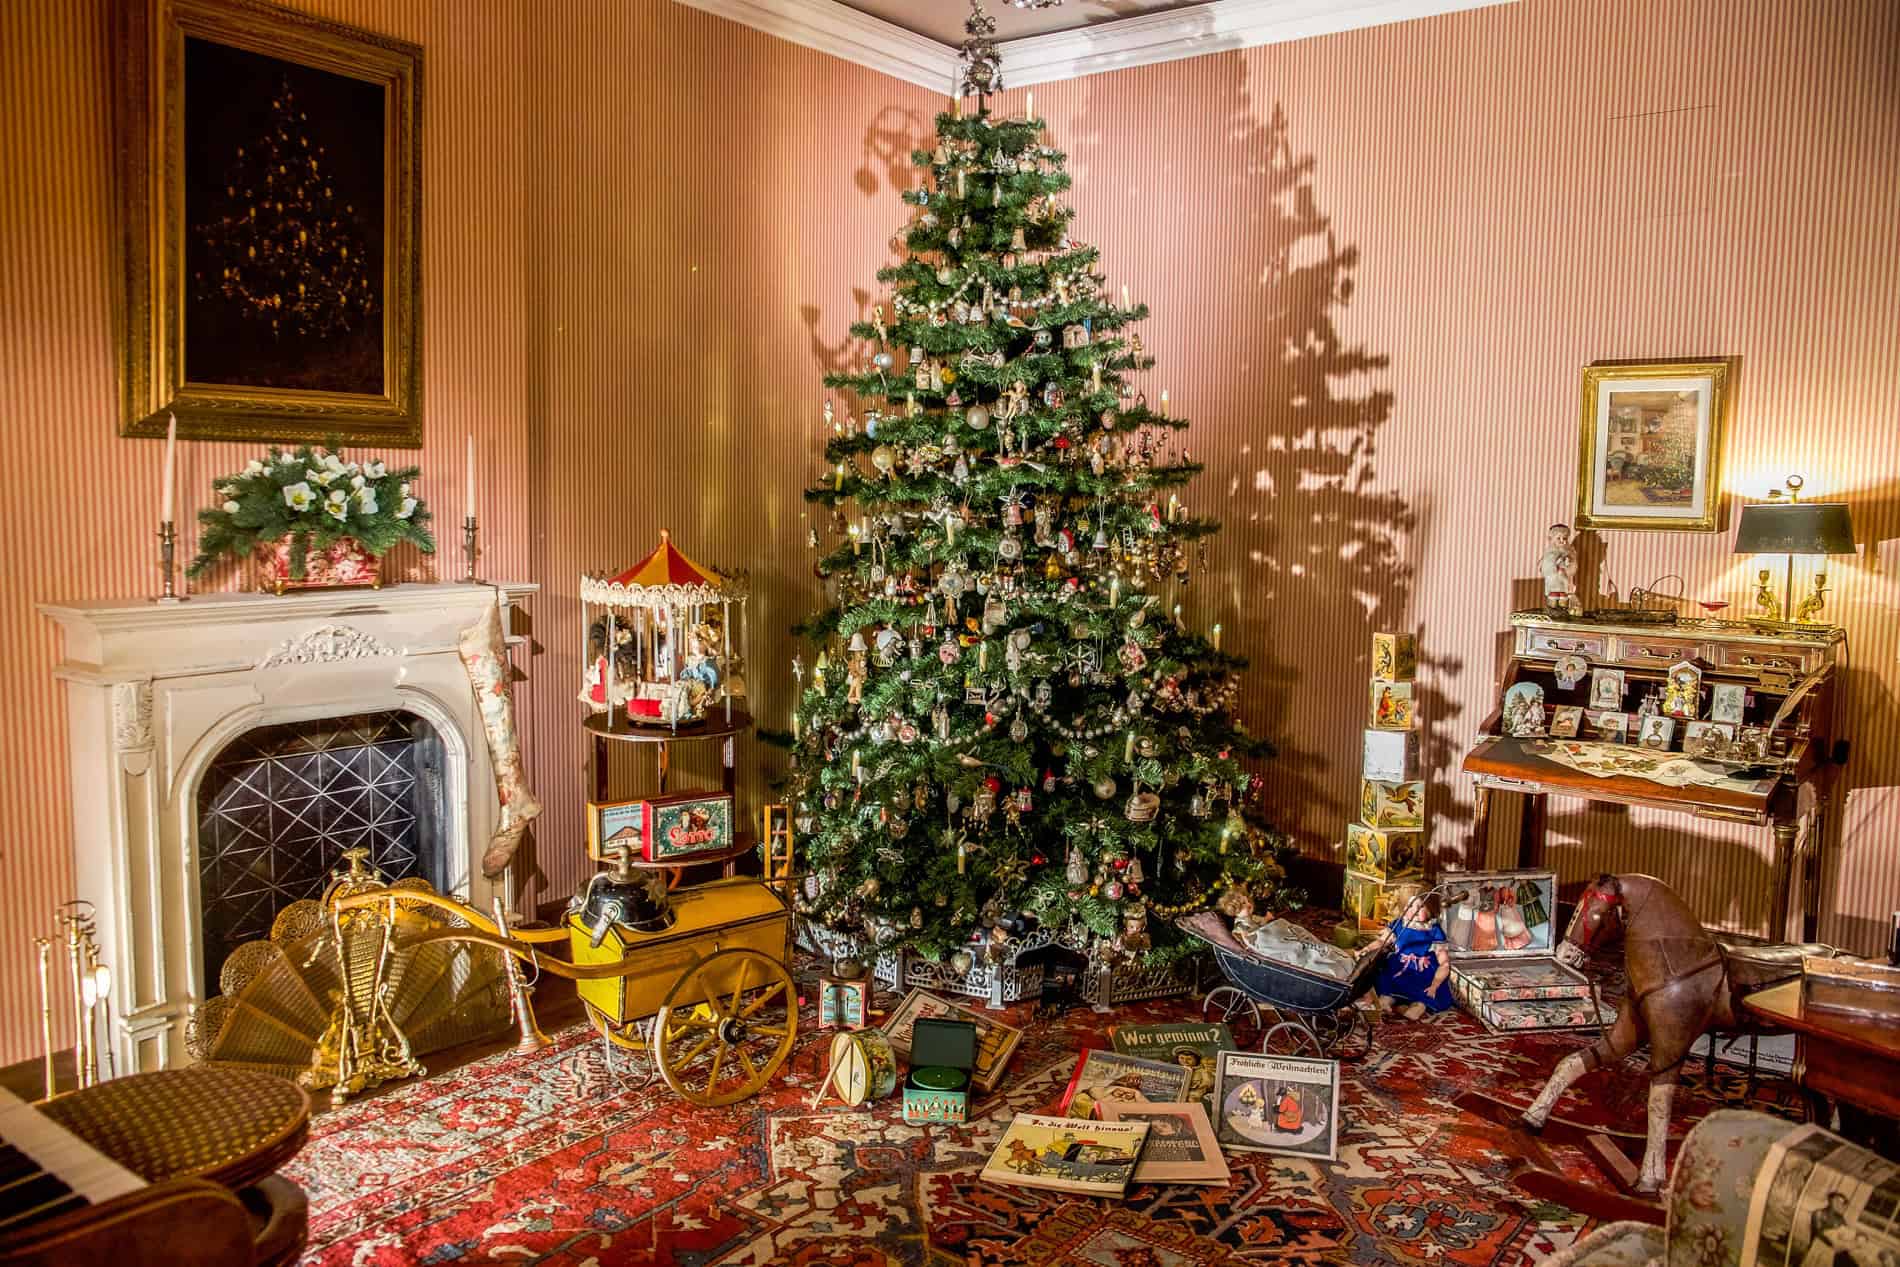 The Family Christmas exhibit at the Christmas Museum in Salzburg shows a dated living room, a large decorated Christmas tree surrounded children's toys and books.